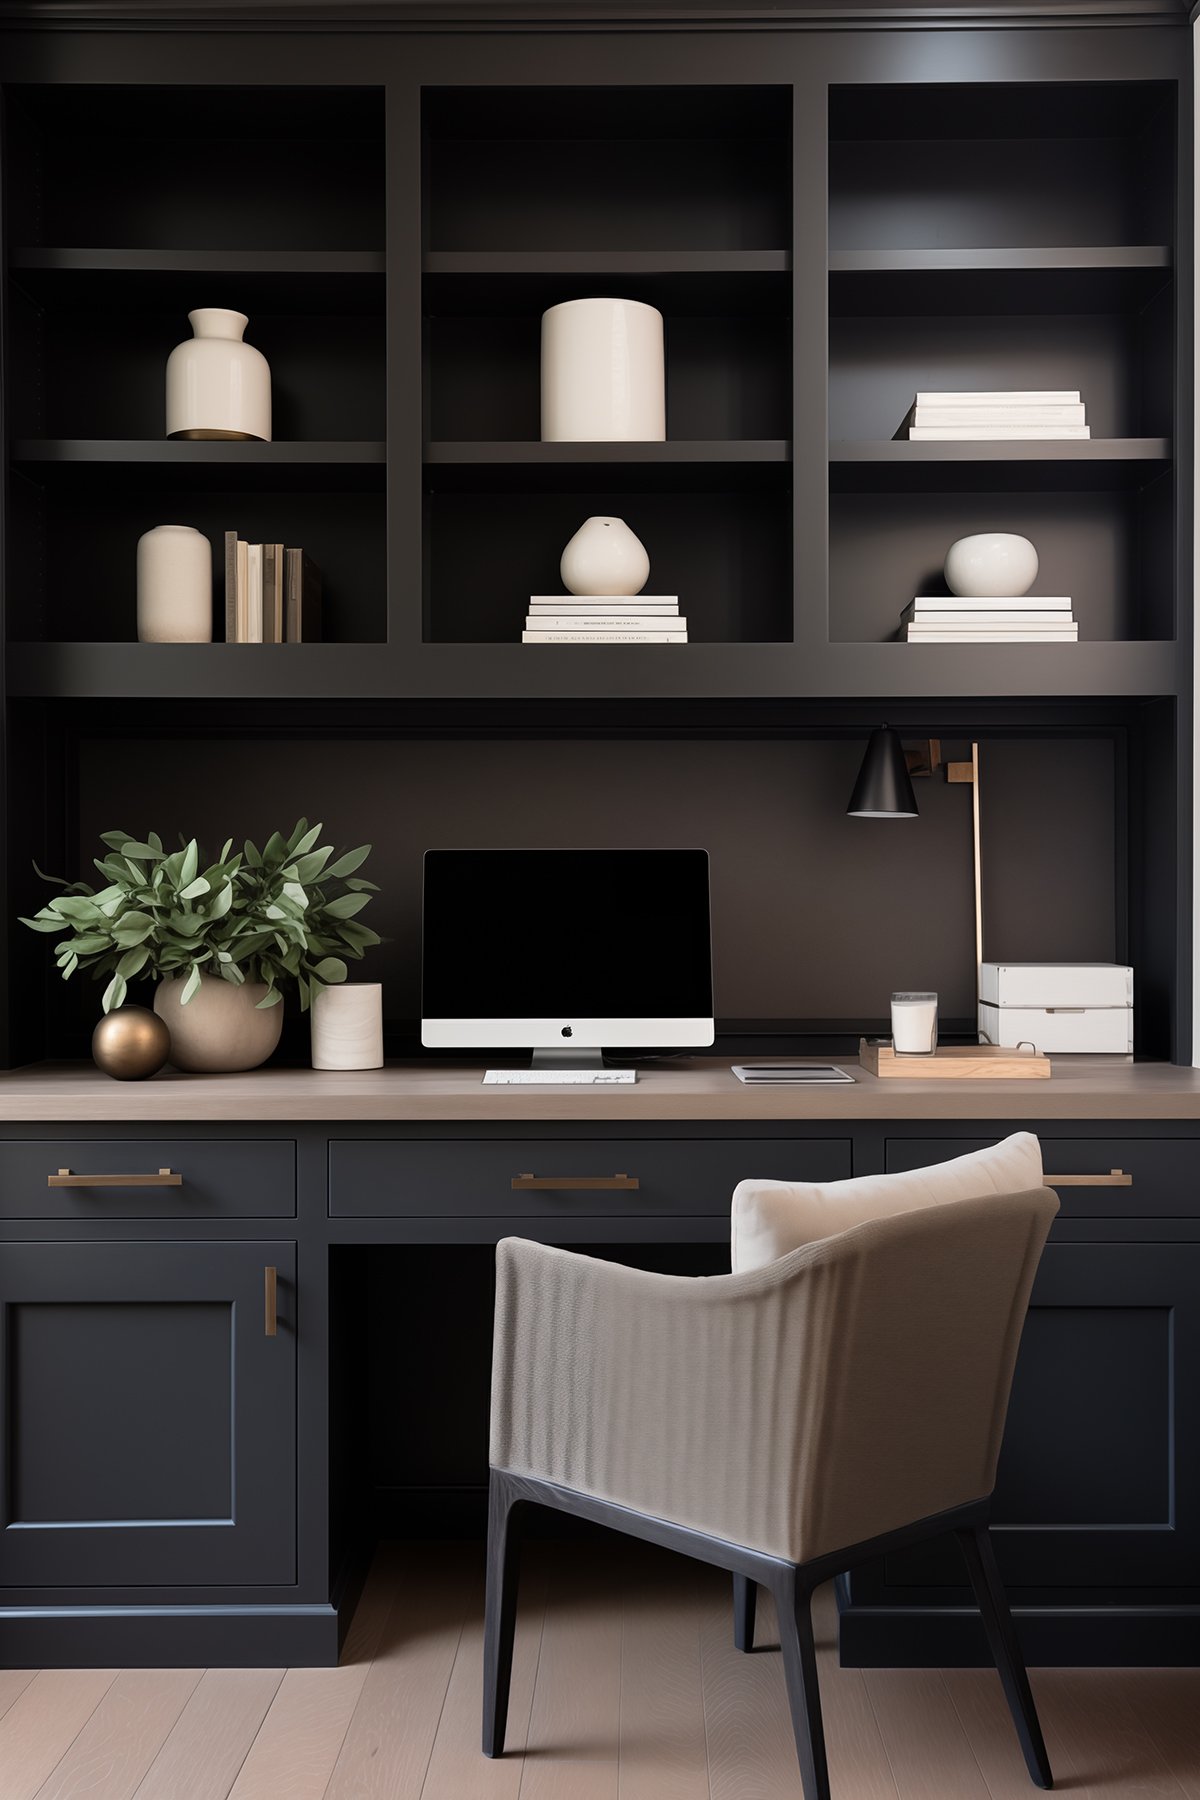 Dark-toned office with black shelves, a wooden desk, a cozy chair, and greenery.